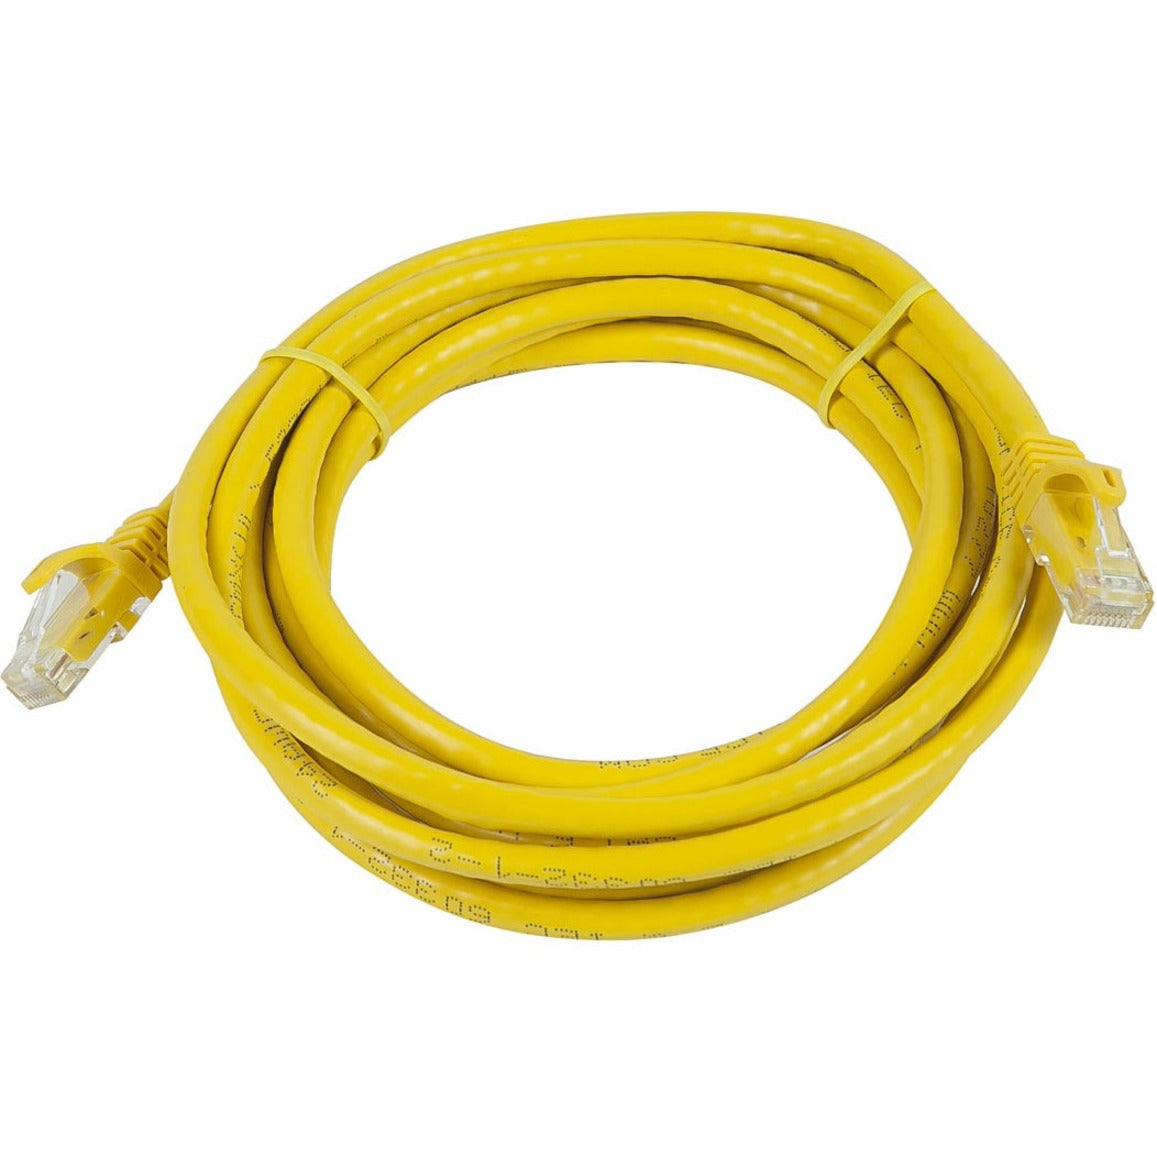 Monoprice 11258 FLEXboot Series Cat6 24AWG UTP Ethernet Network Patch Cable, 14ft Yellow